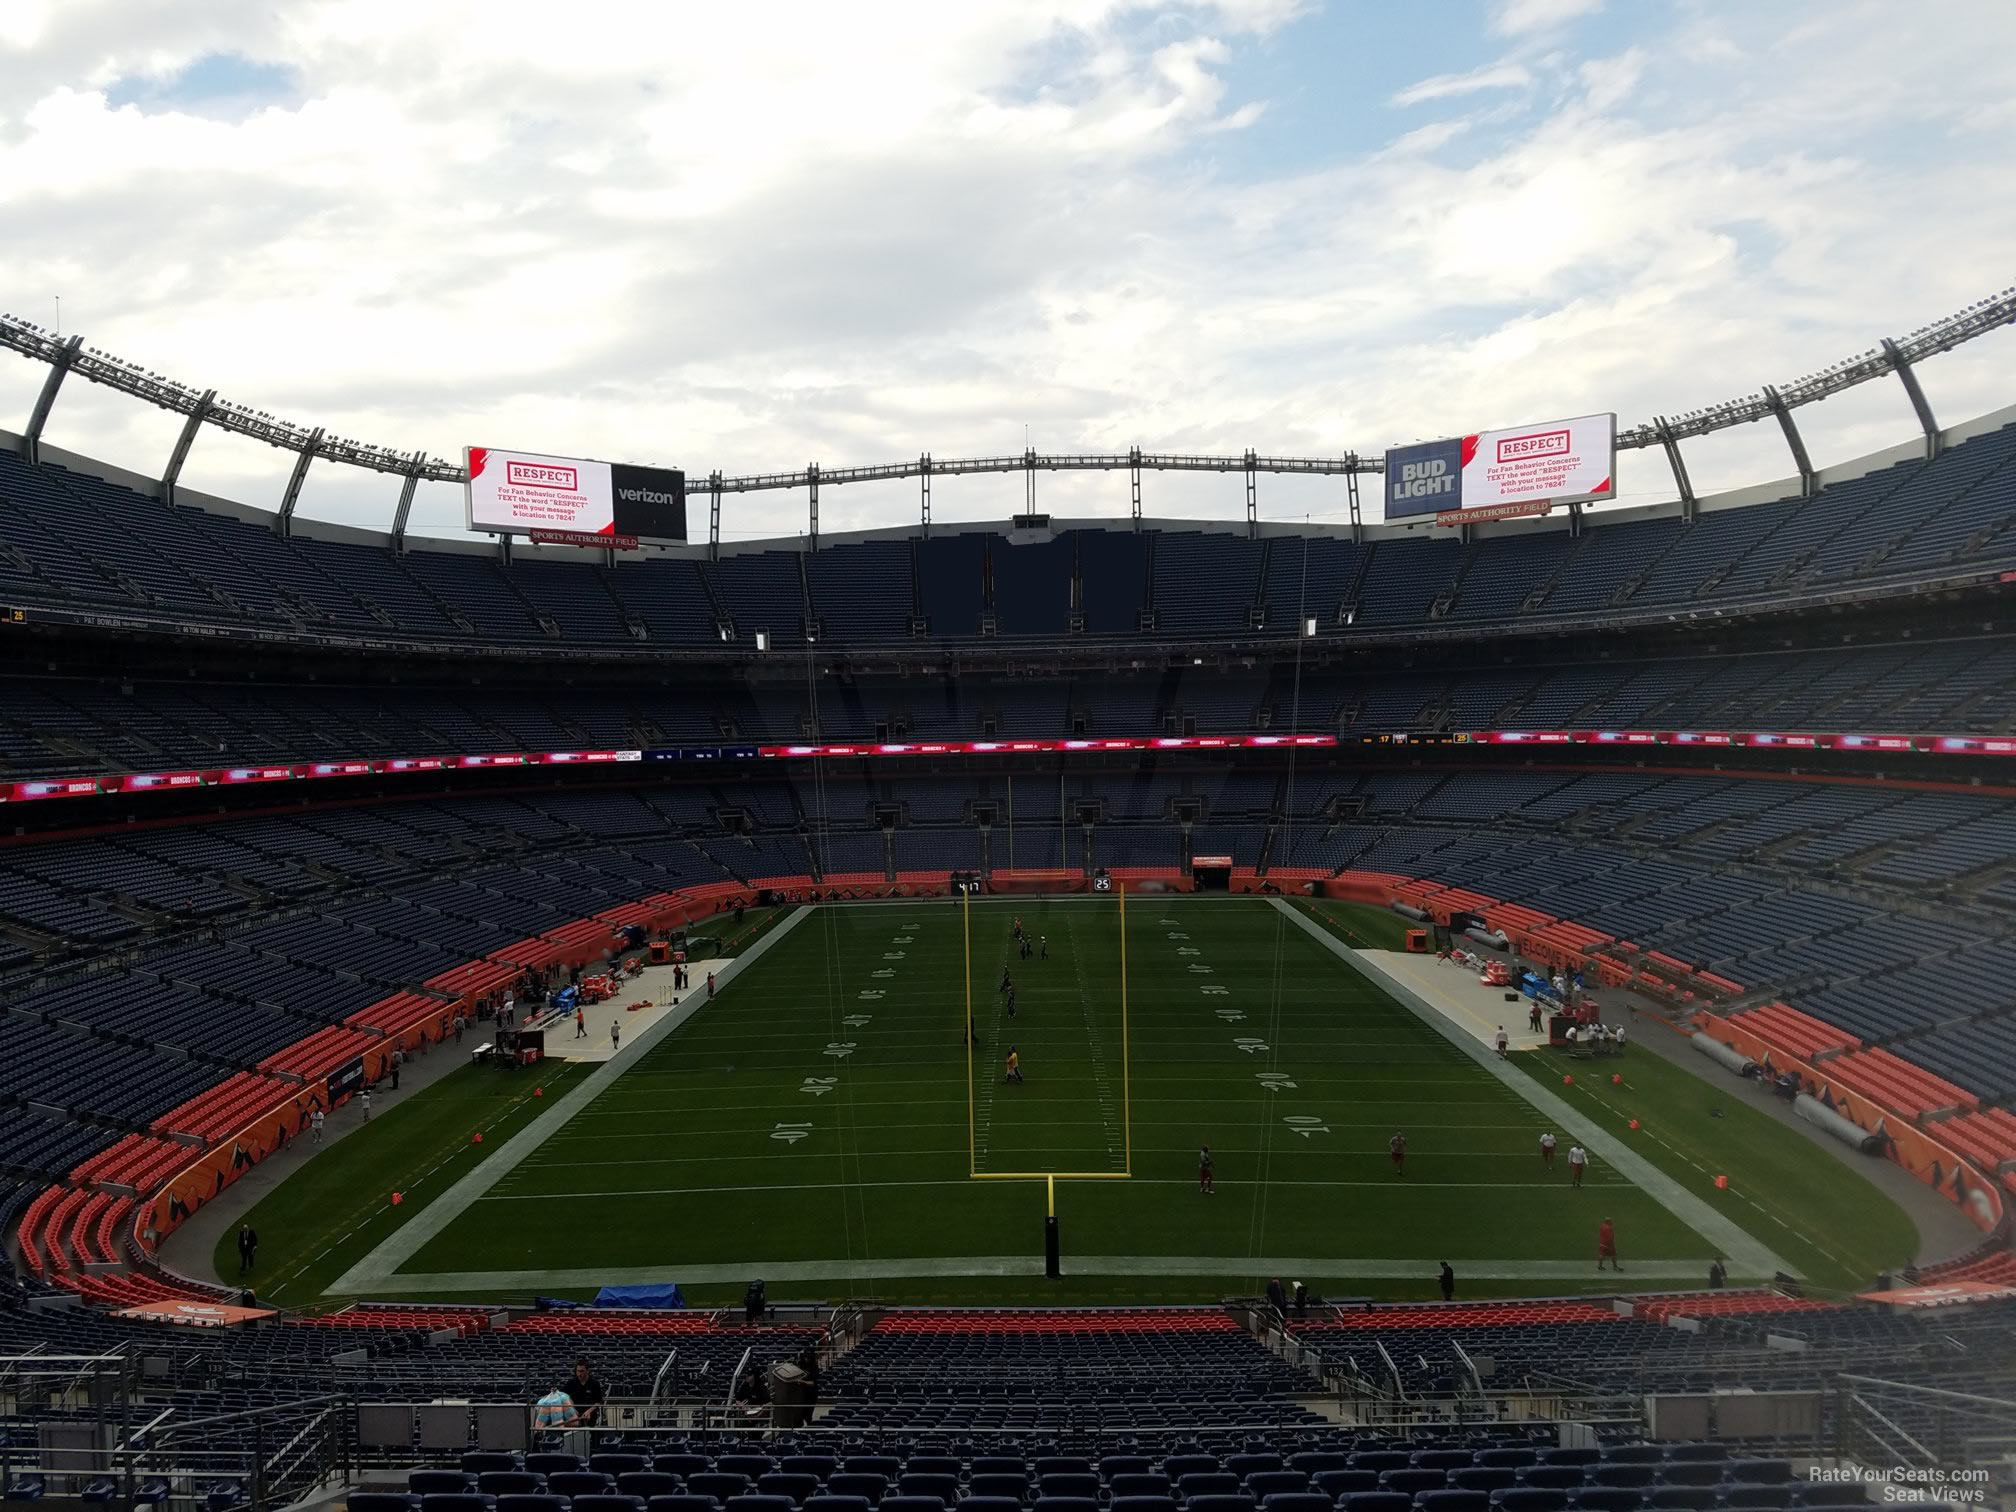 section 232, row 16 seat view  - empower field (at mile high)